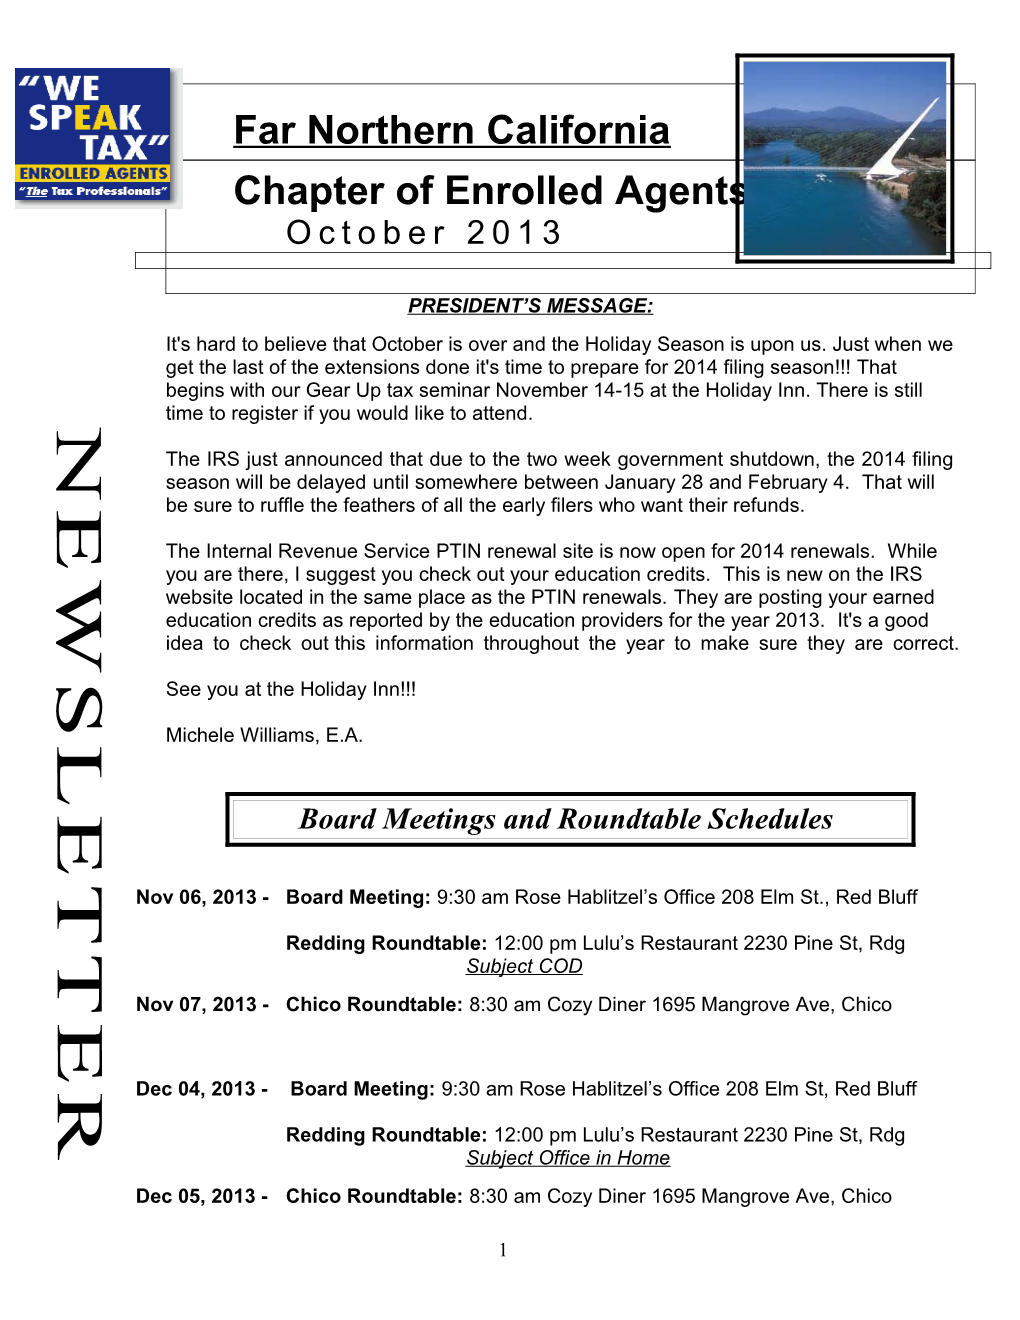 Chapter of Enrolled Agents